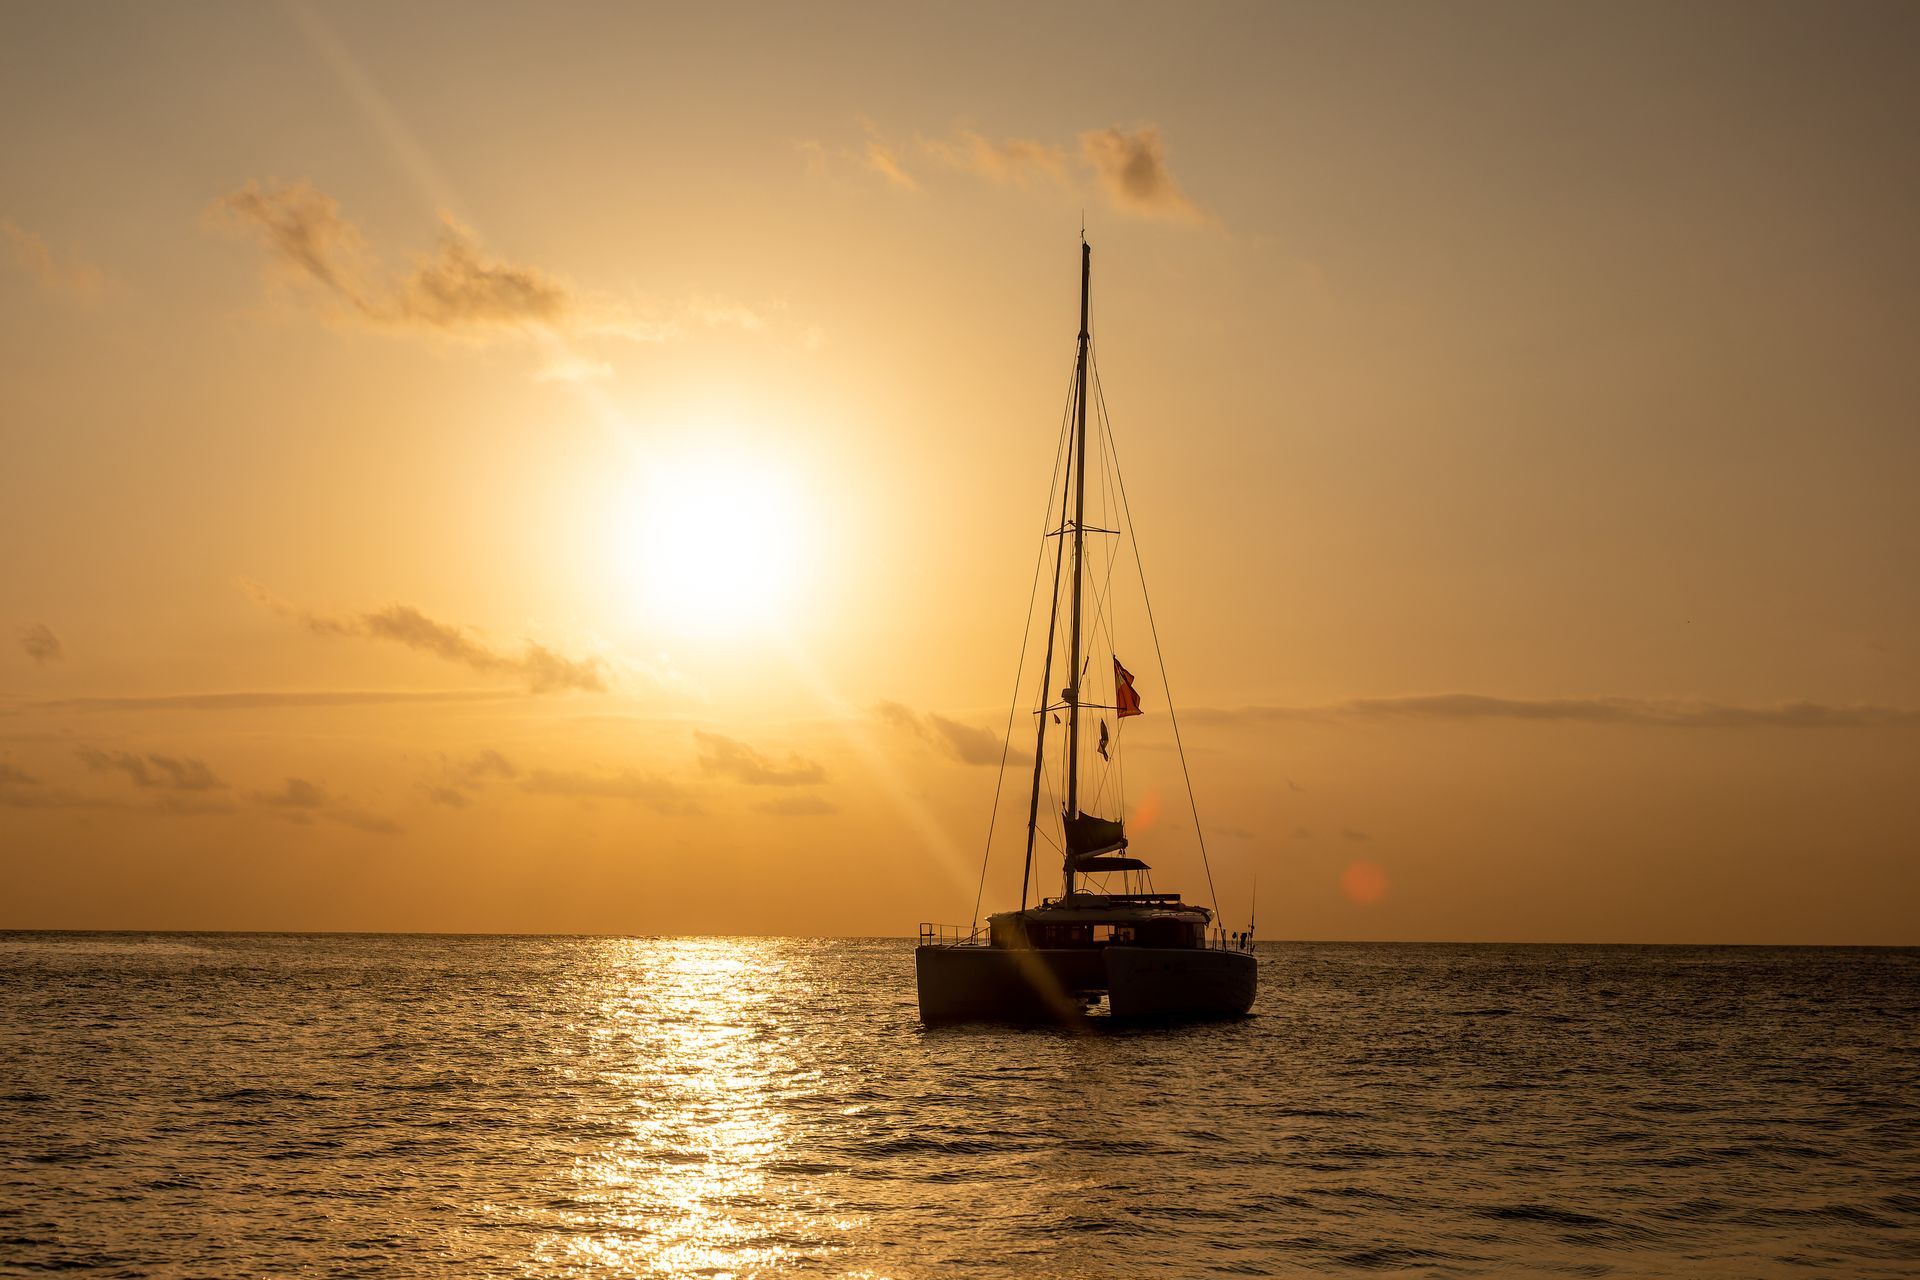 A sailboat is floating on top of a body of water at sunset.